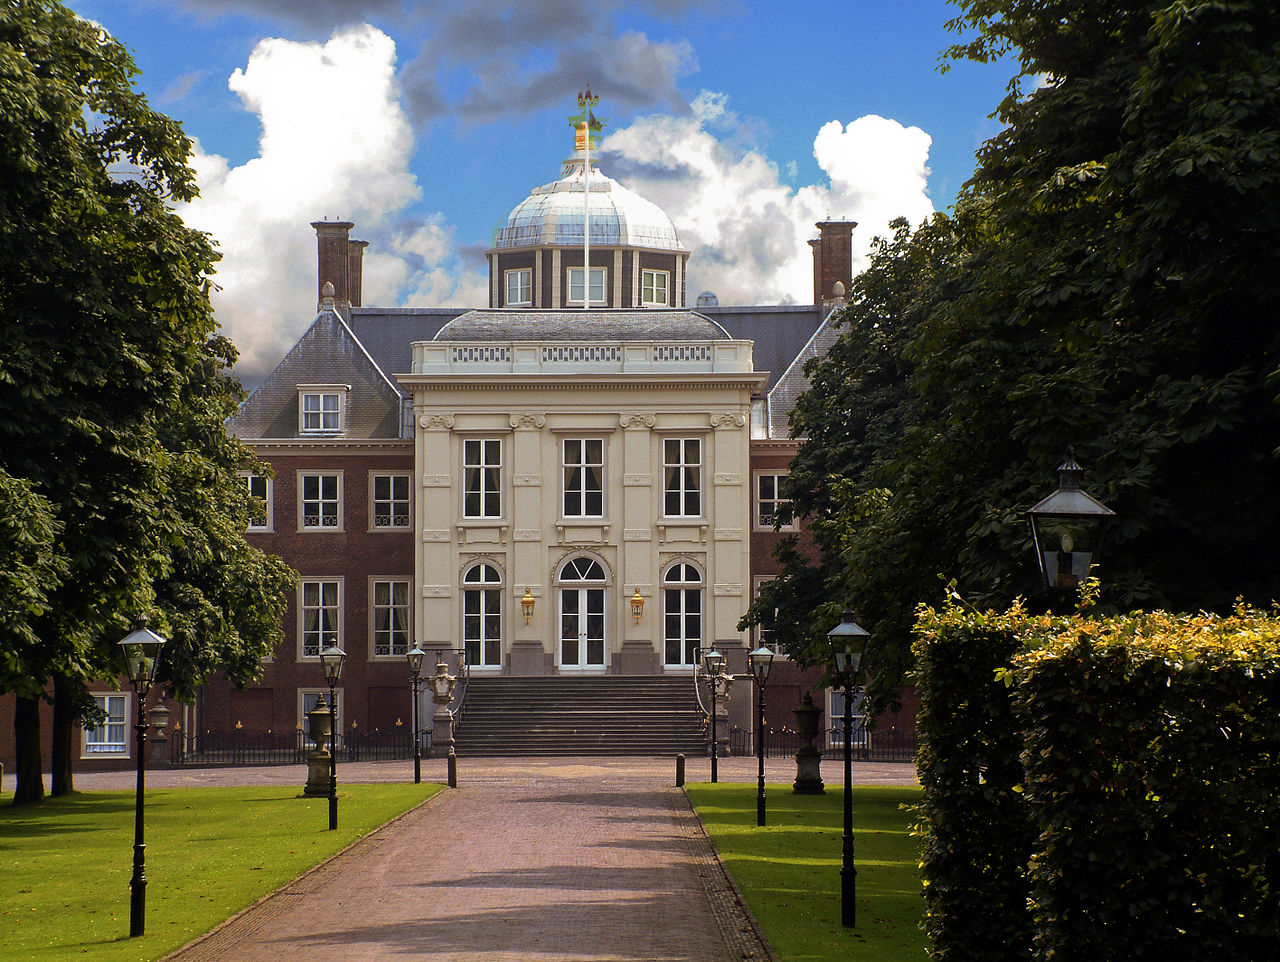 Haagse Bos and Huis ten Bosch